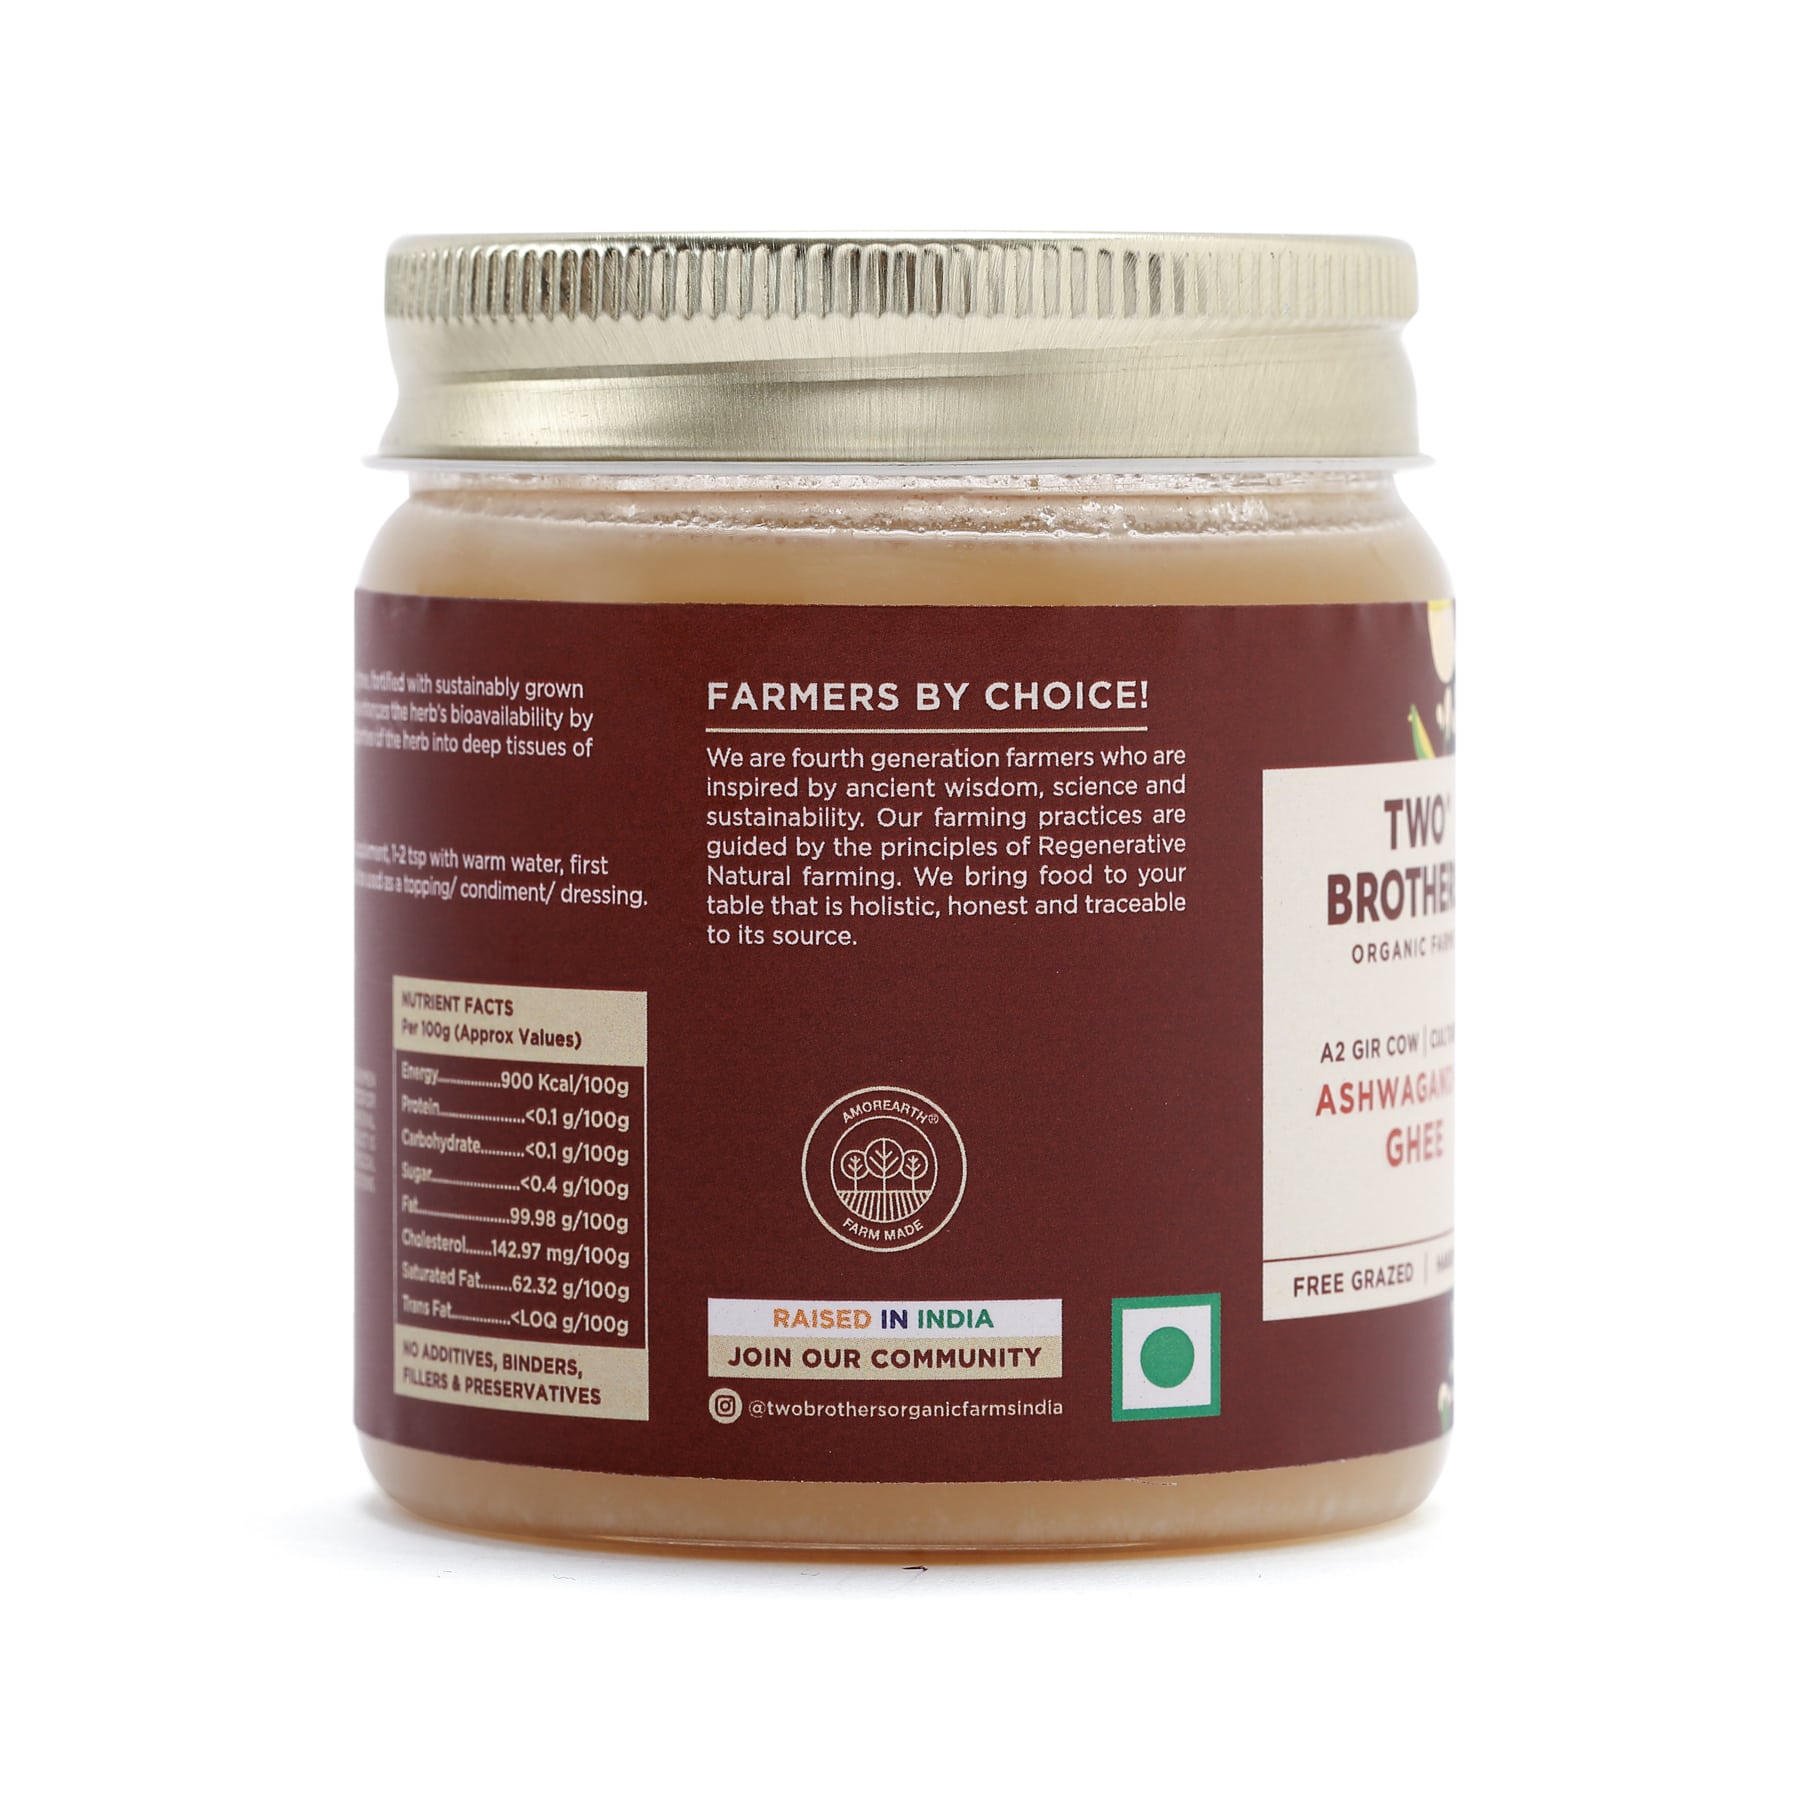 Buy Two Brothers Amorearth A2 Cultured Ashwagandha Ghee Online